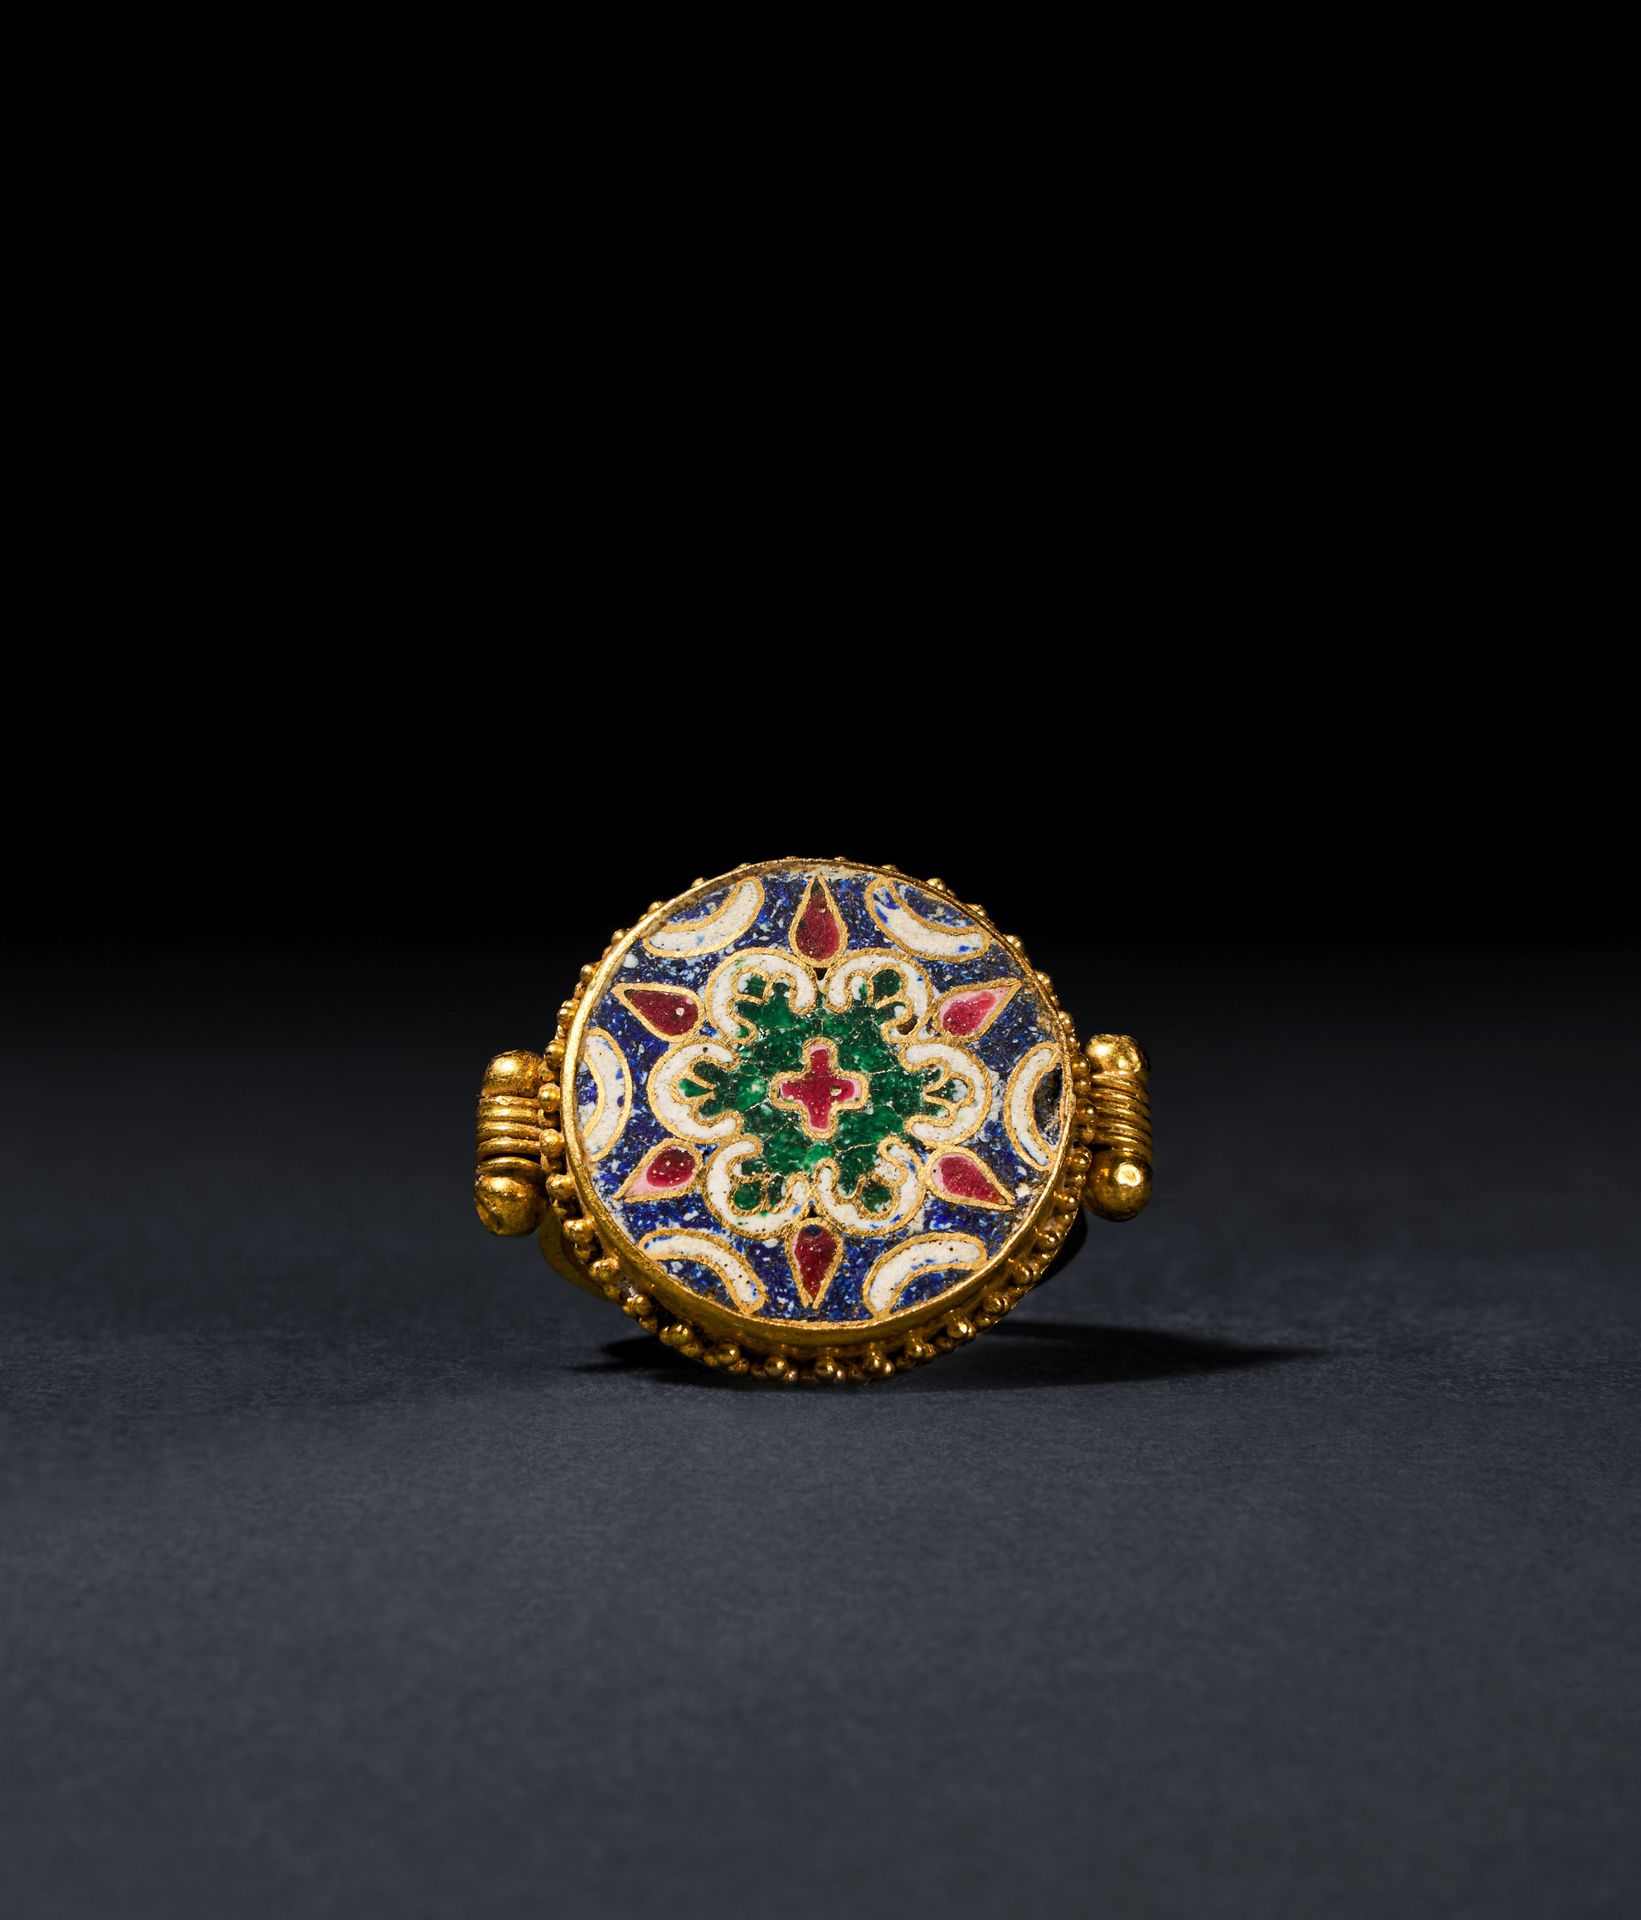 A BYZANTINE GOLD AND ENAMEL DISK RING, CIRCA 10TH-12TH CENTURY A.D. BYZANTINISCH&hellip;